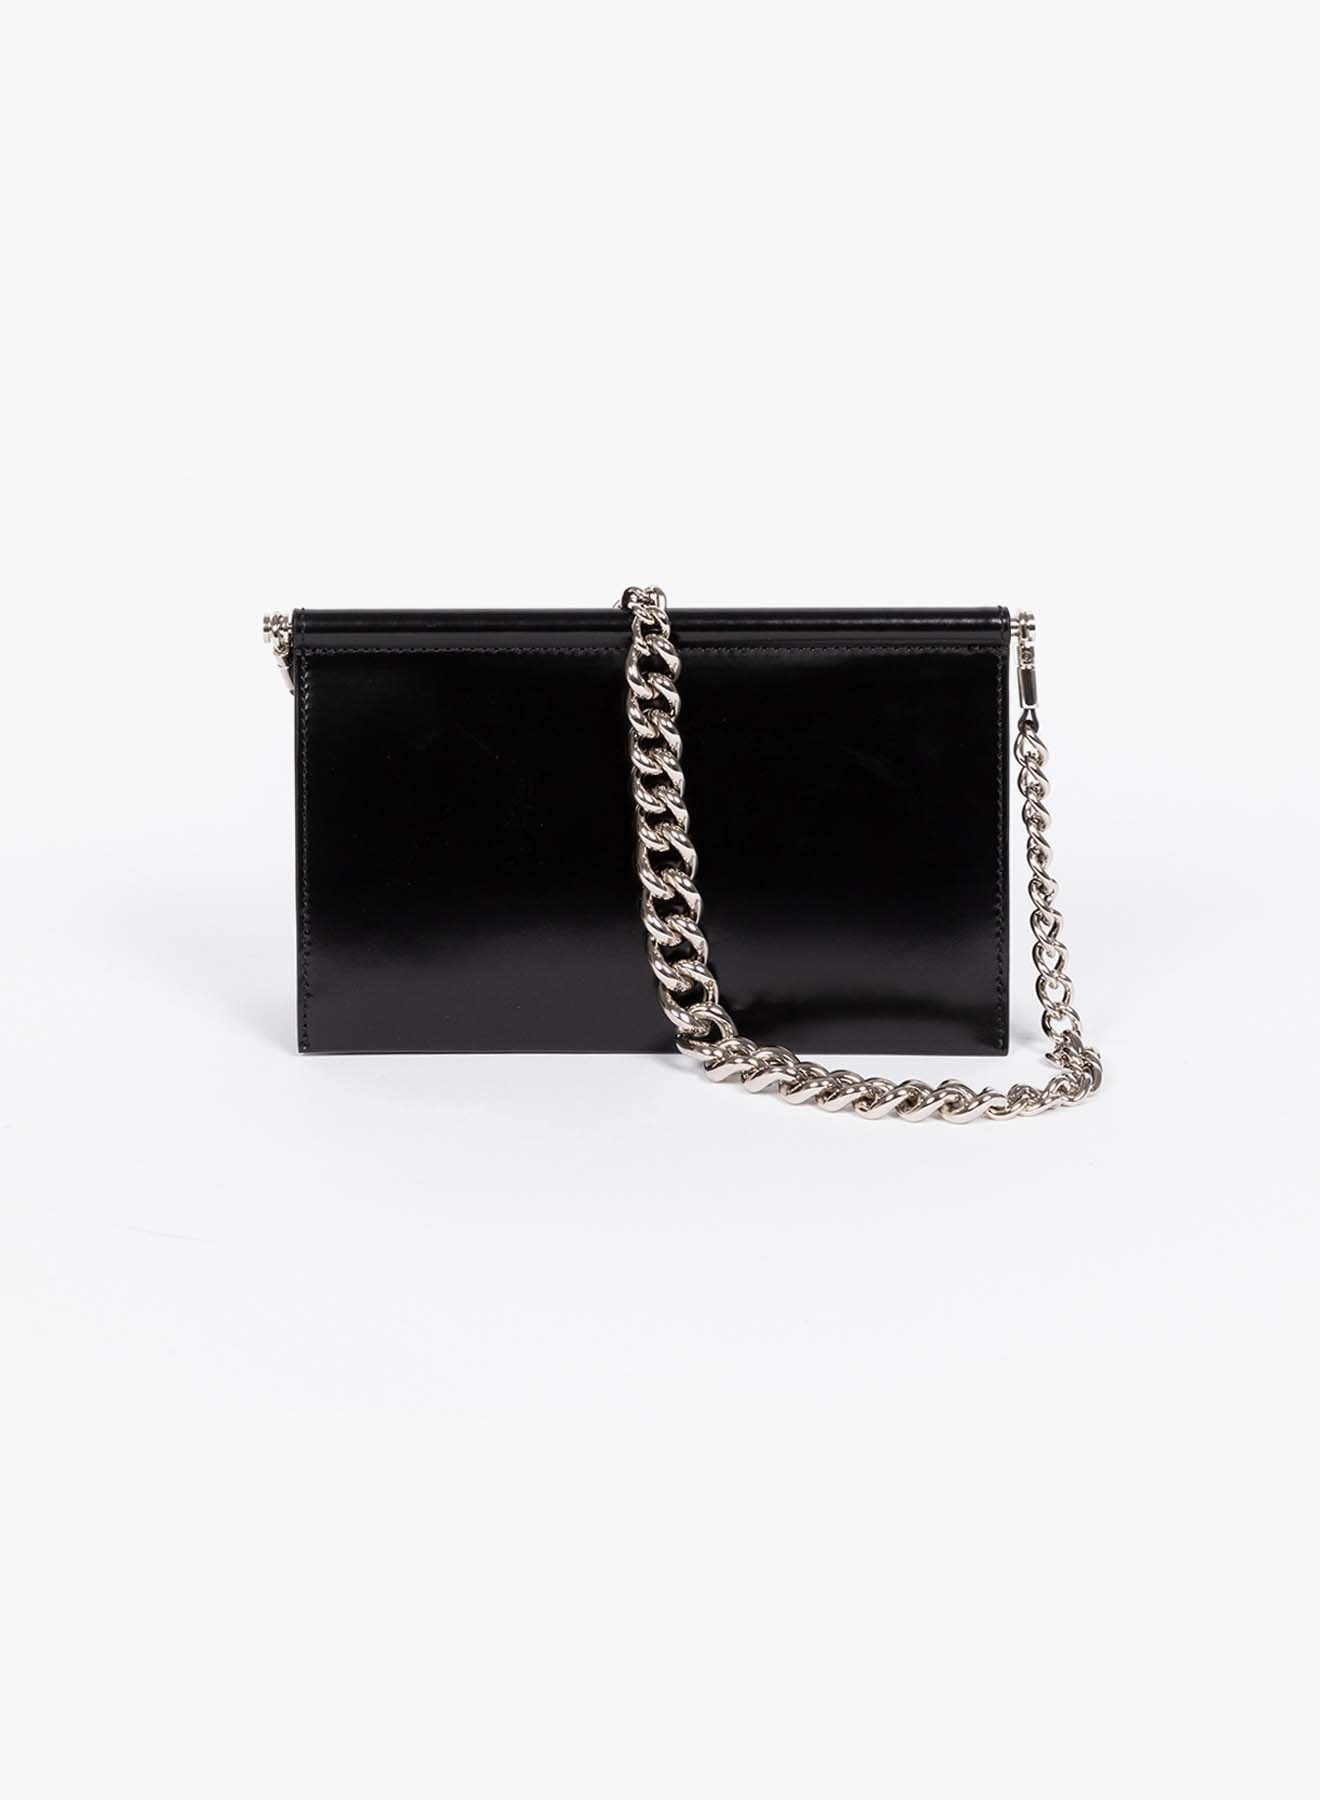 CLUTCH WITH CHAIN - 4